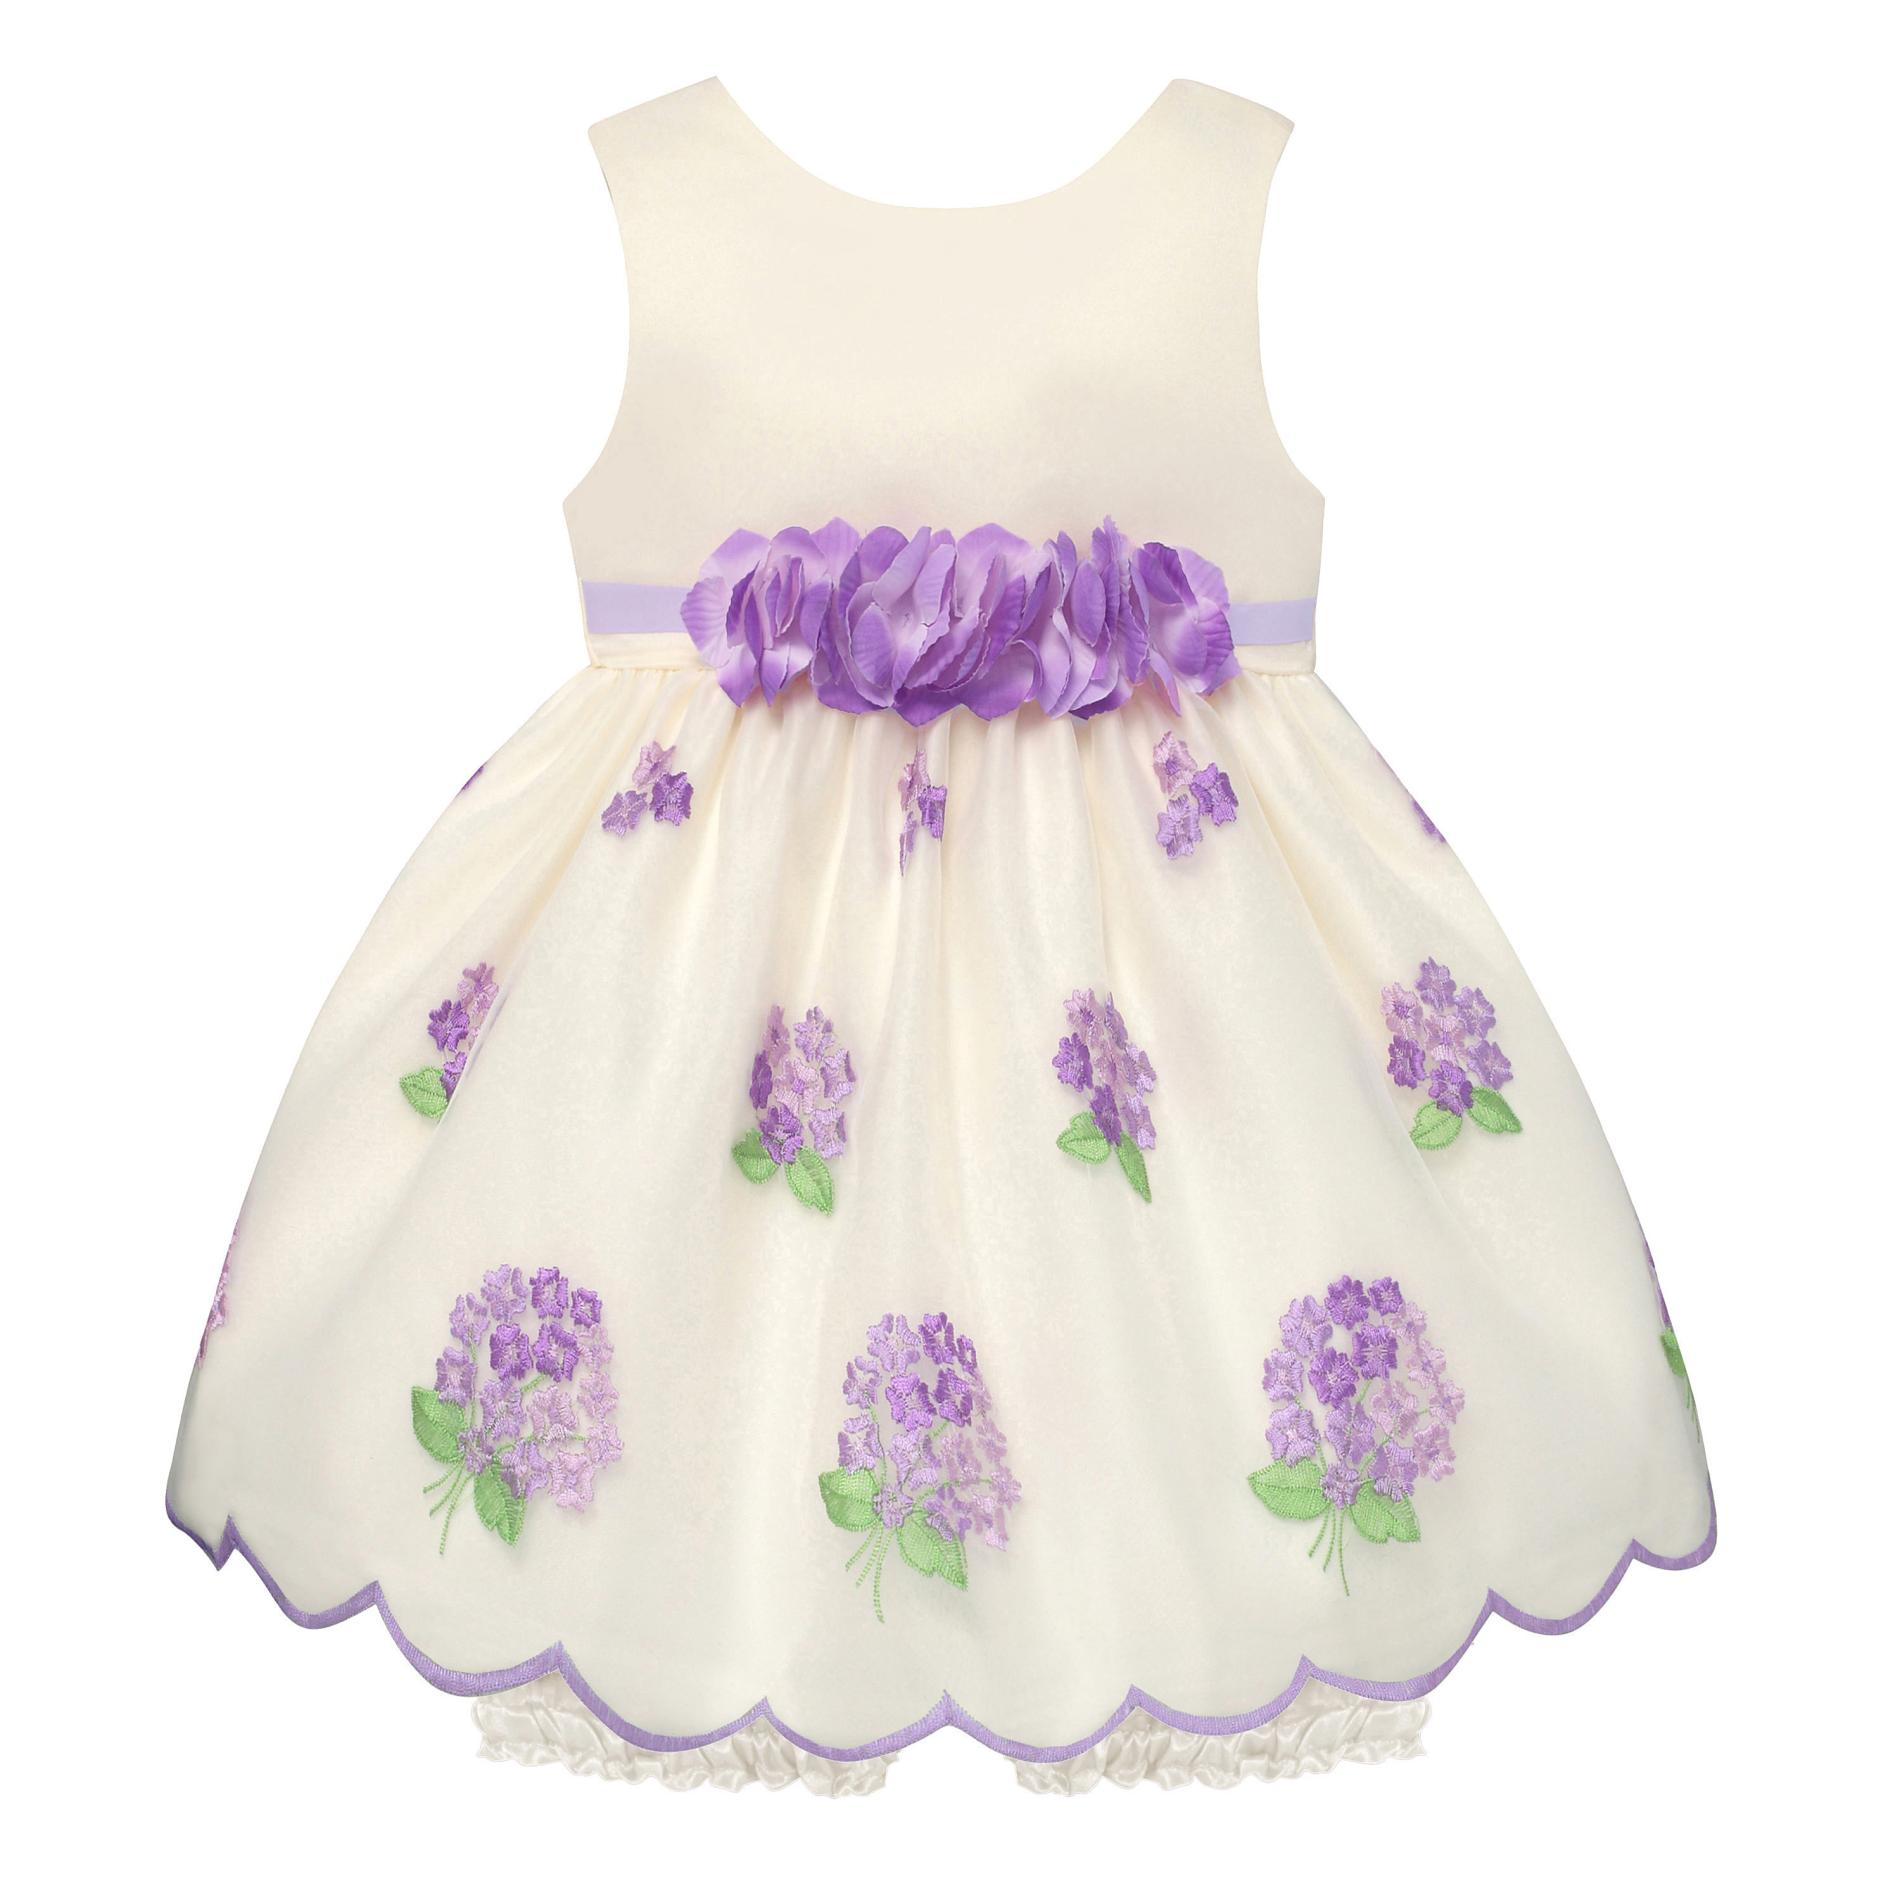 American Princess Toddler Girl's Embroidered Party Dress